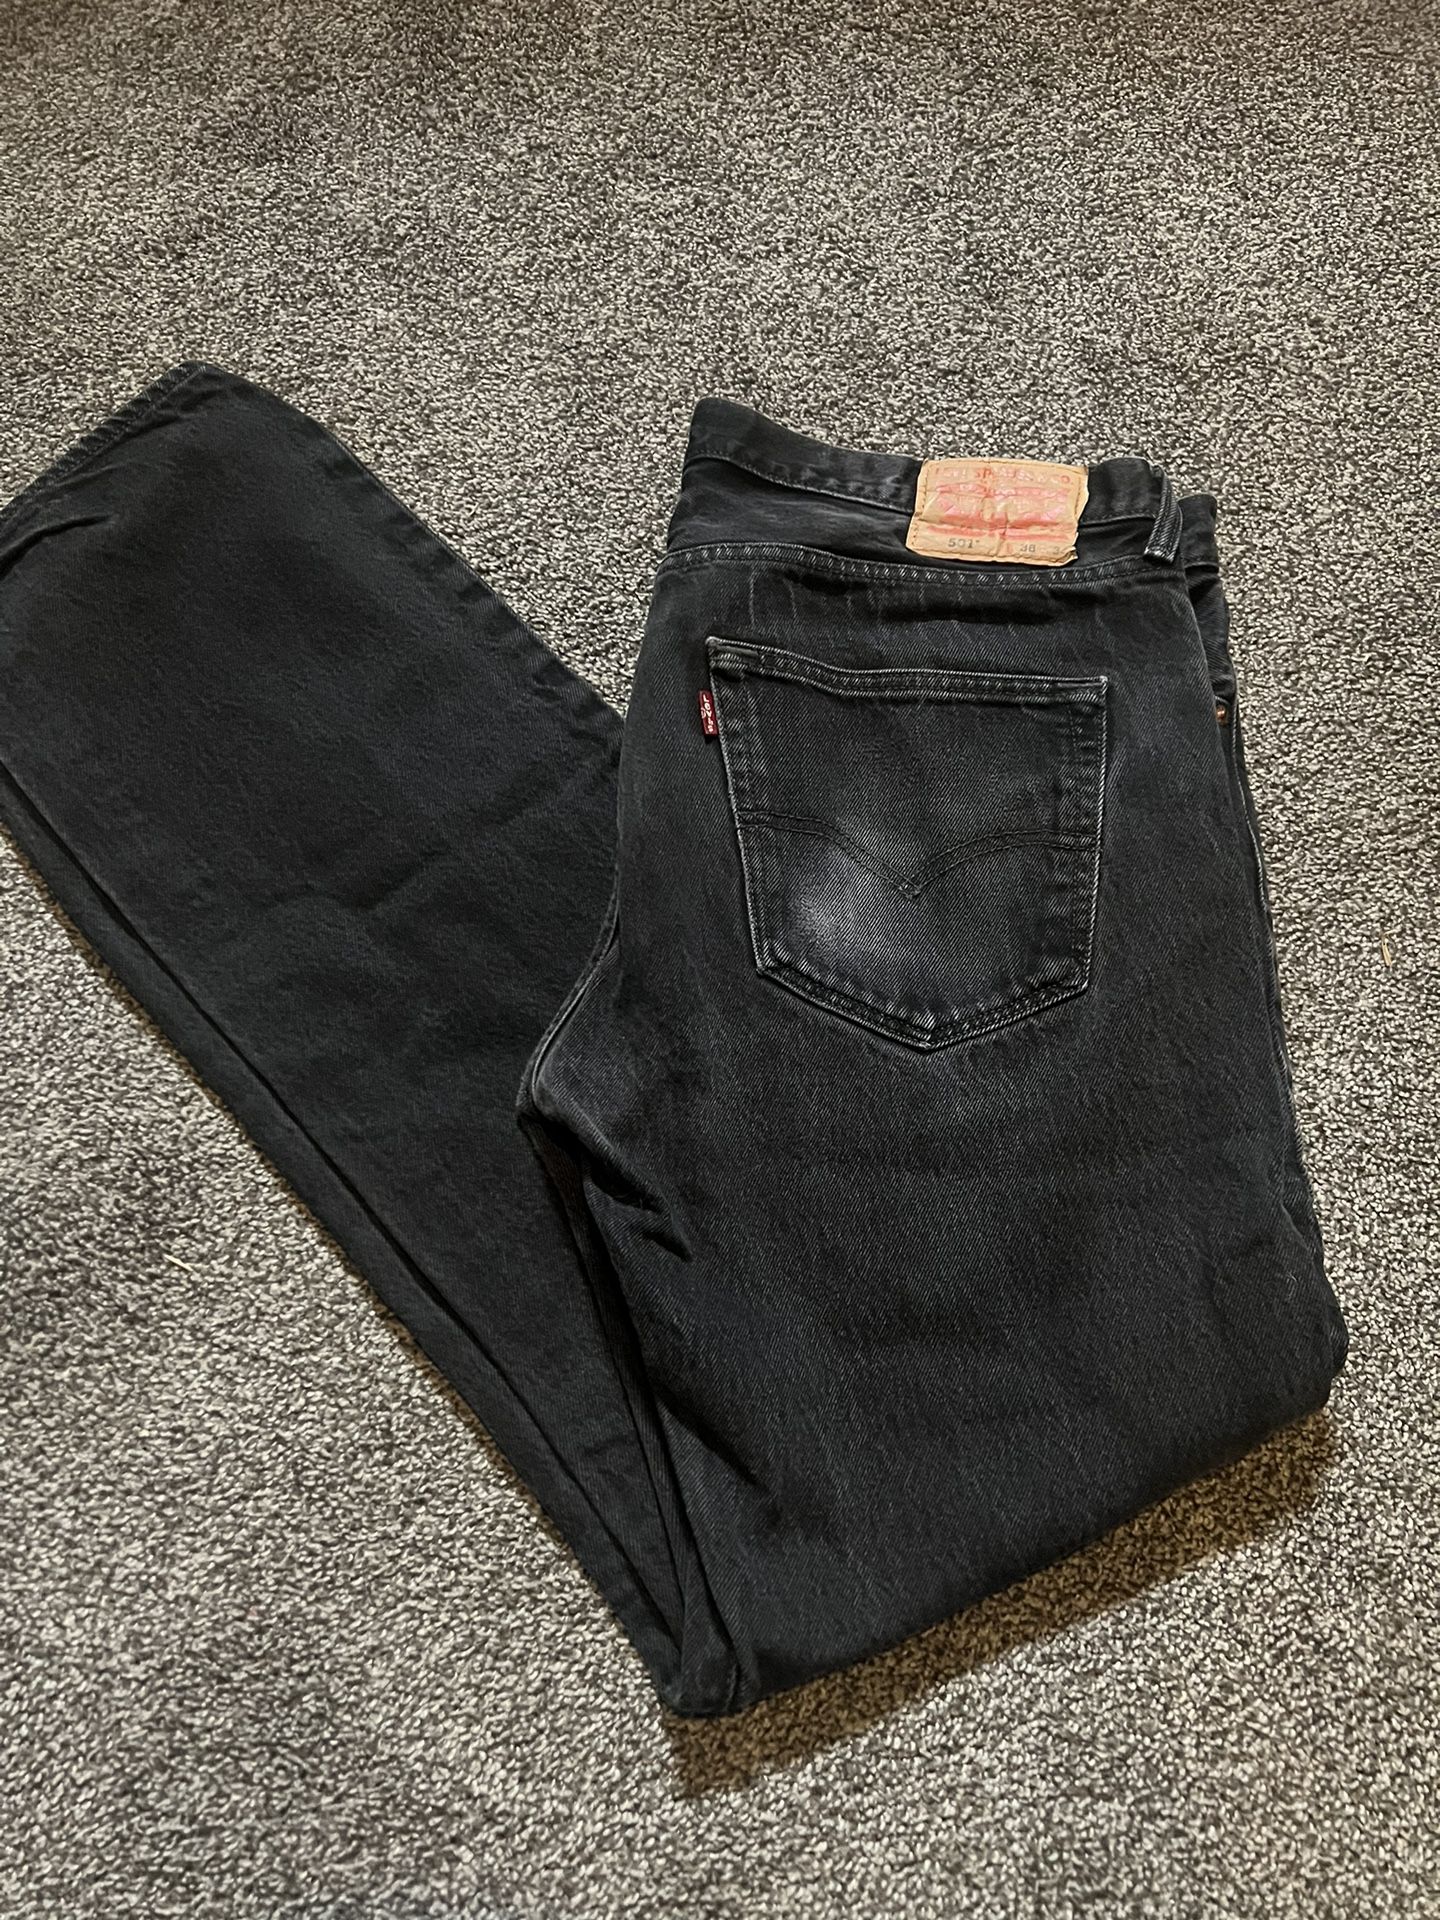 Men's Levi 501 Black Jeans Button Fly Relaxed Fit 36x34 for Sale in  Portland, OR - OfferUp